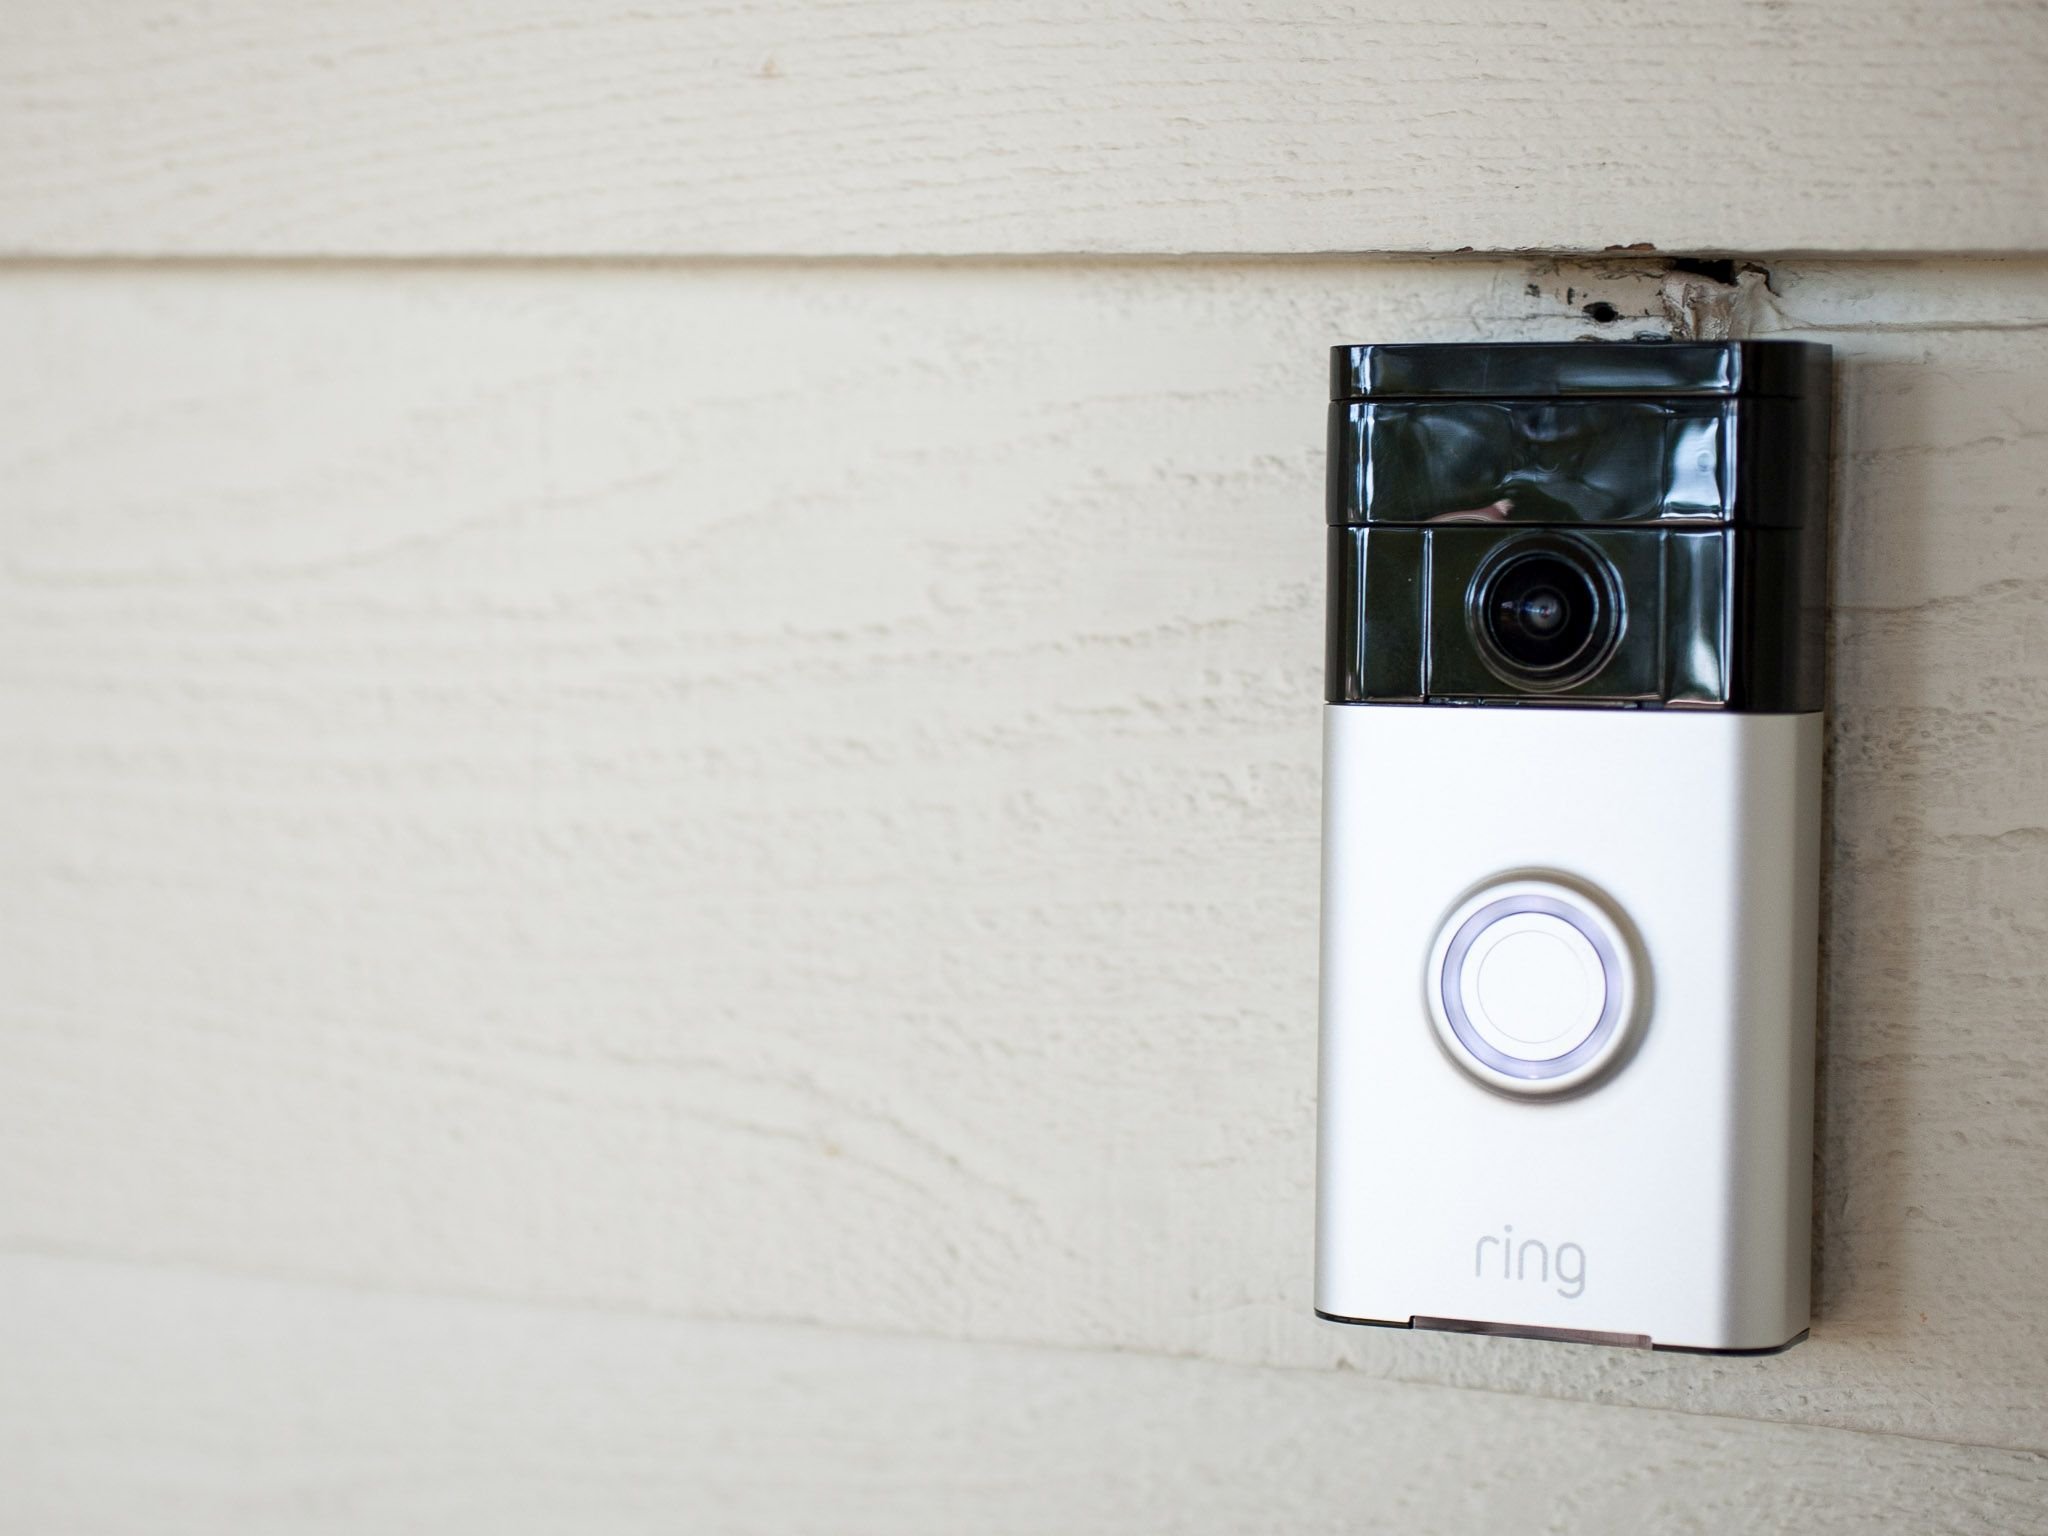 How To Connect To An Existing Ring Doorbell